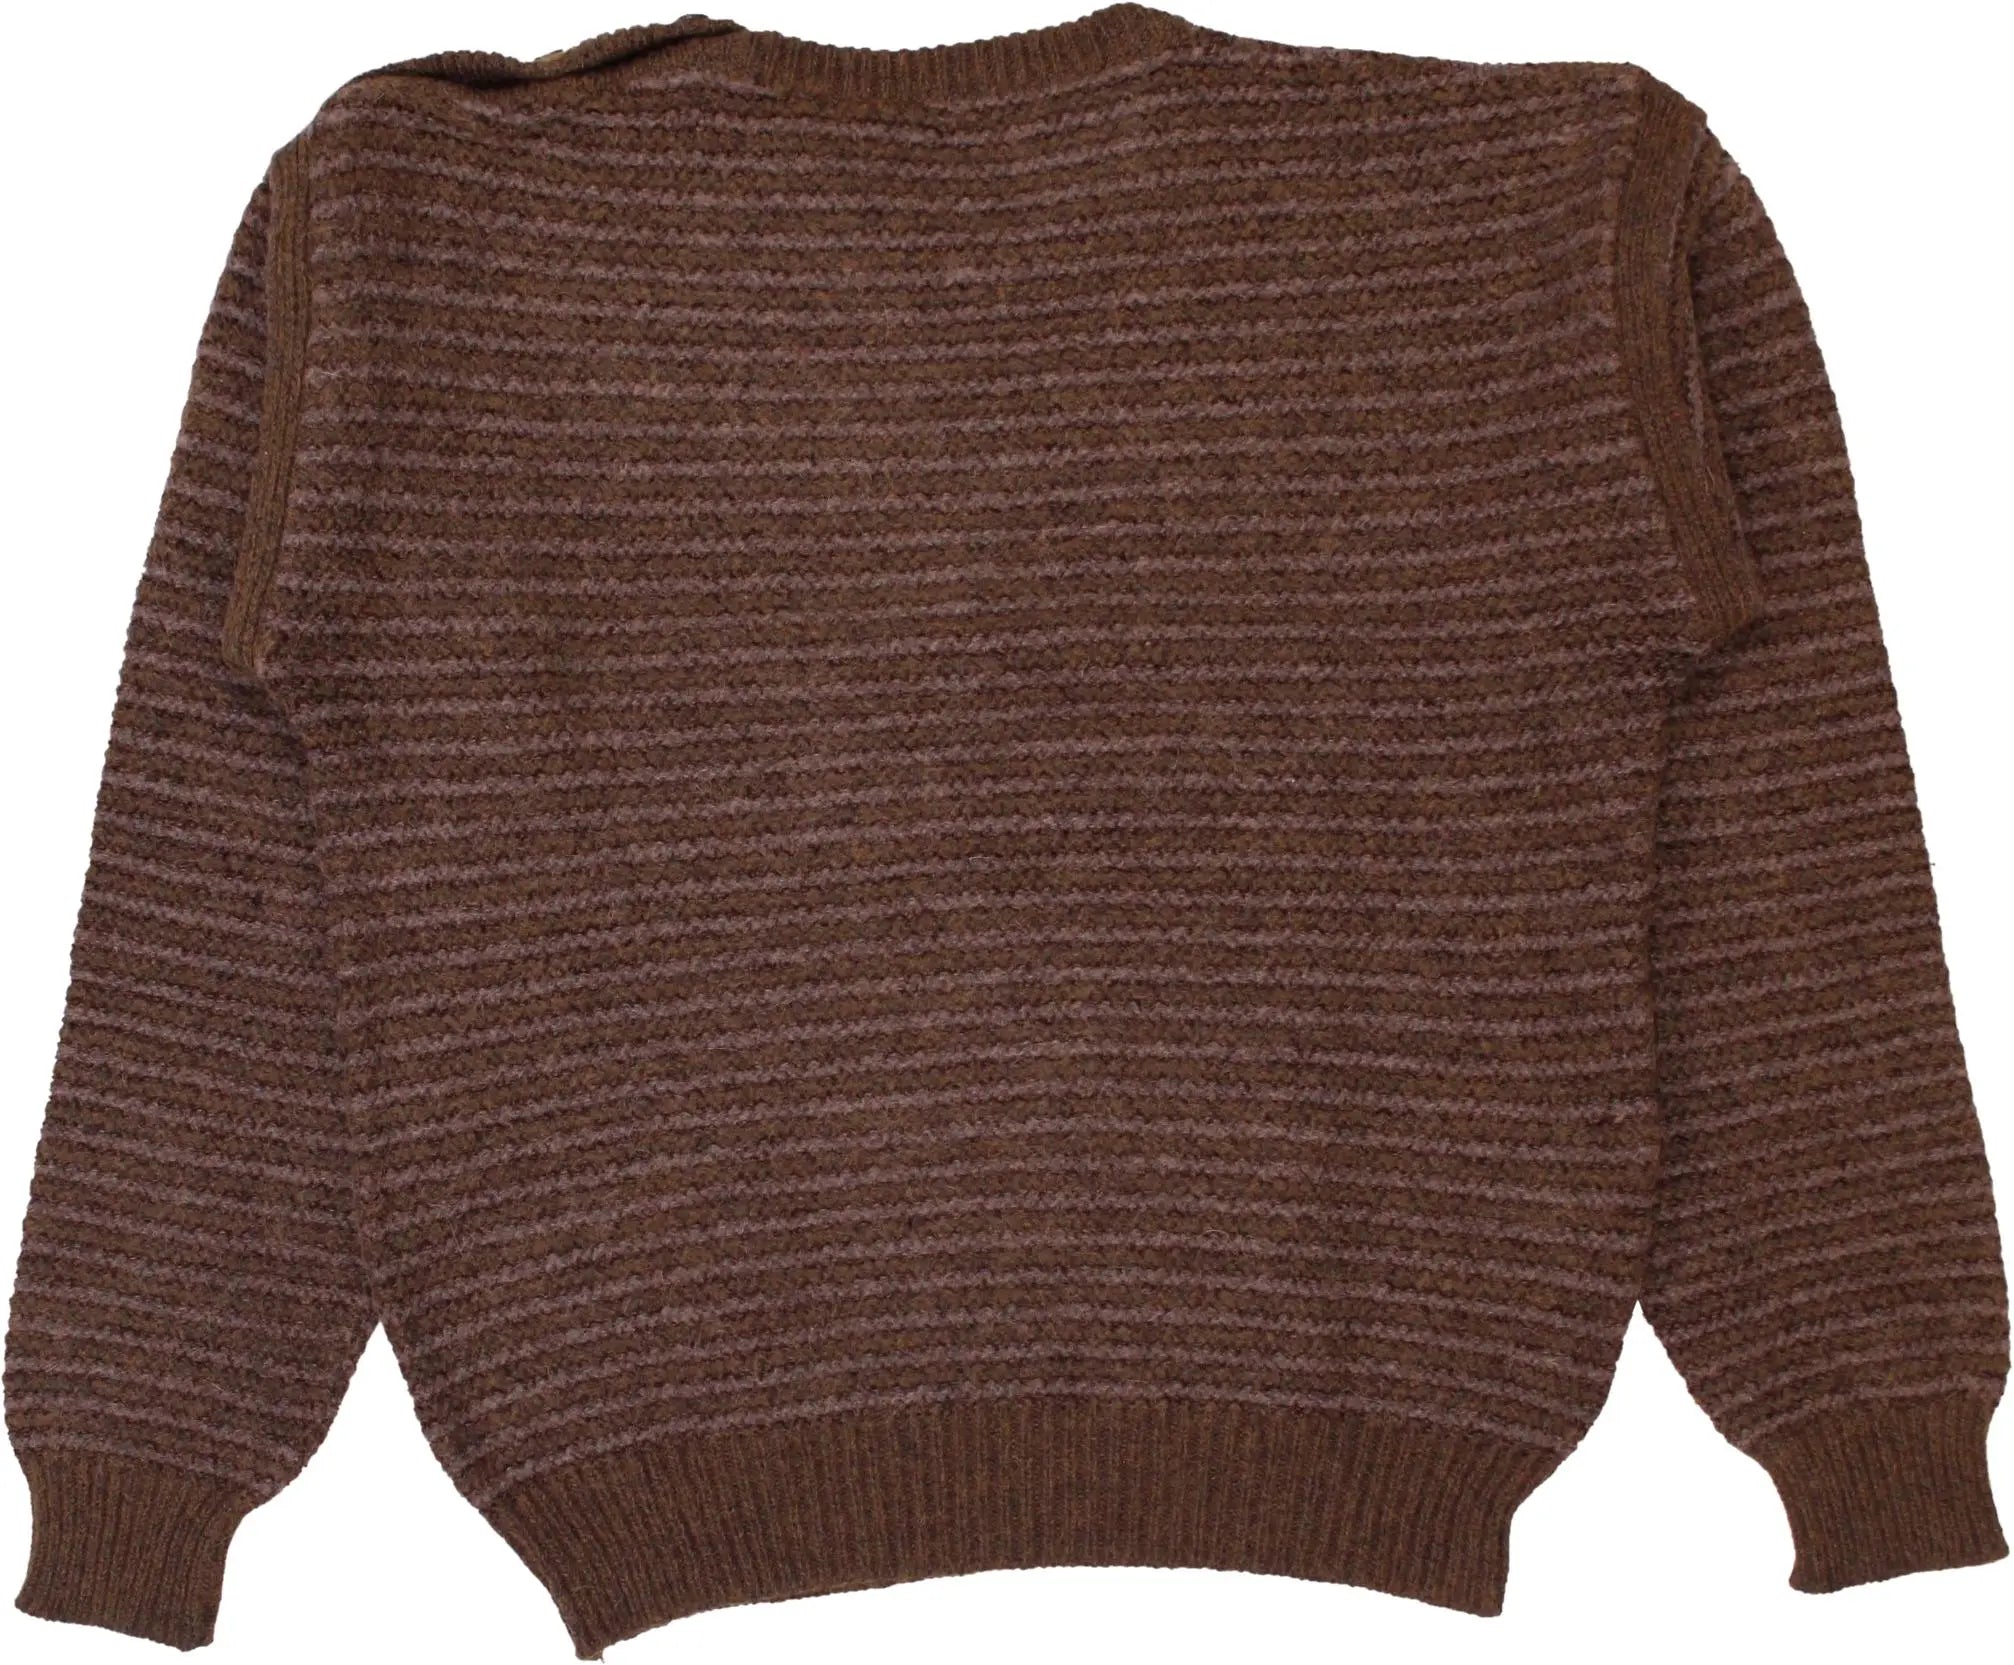 Unknown - Brown Striped Knitted Sweater- ThriftTale.com - Vintage and second handclothing